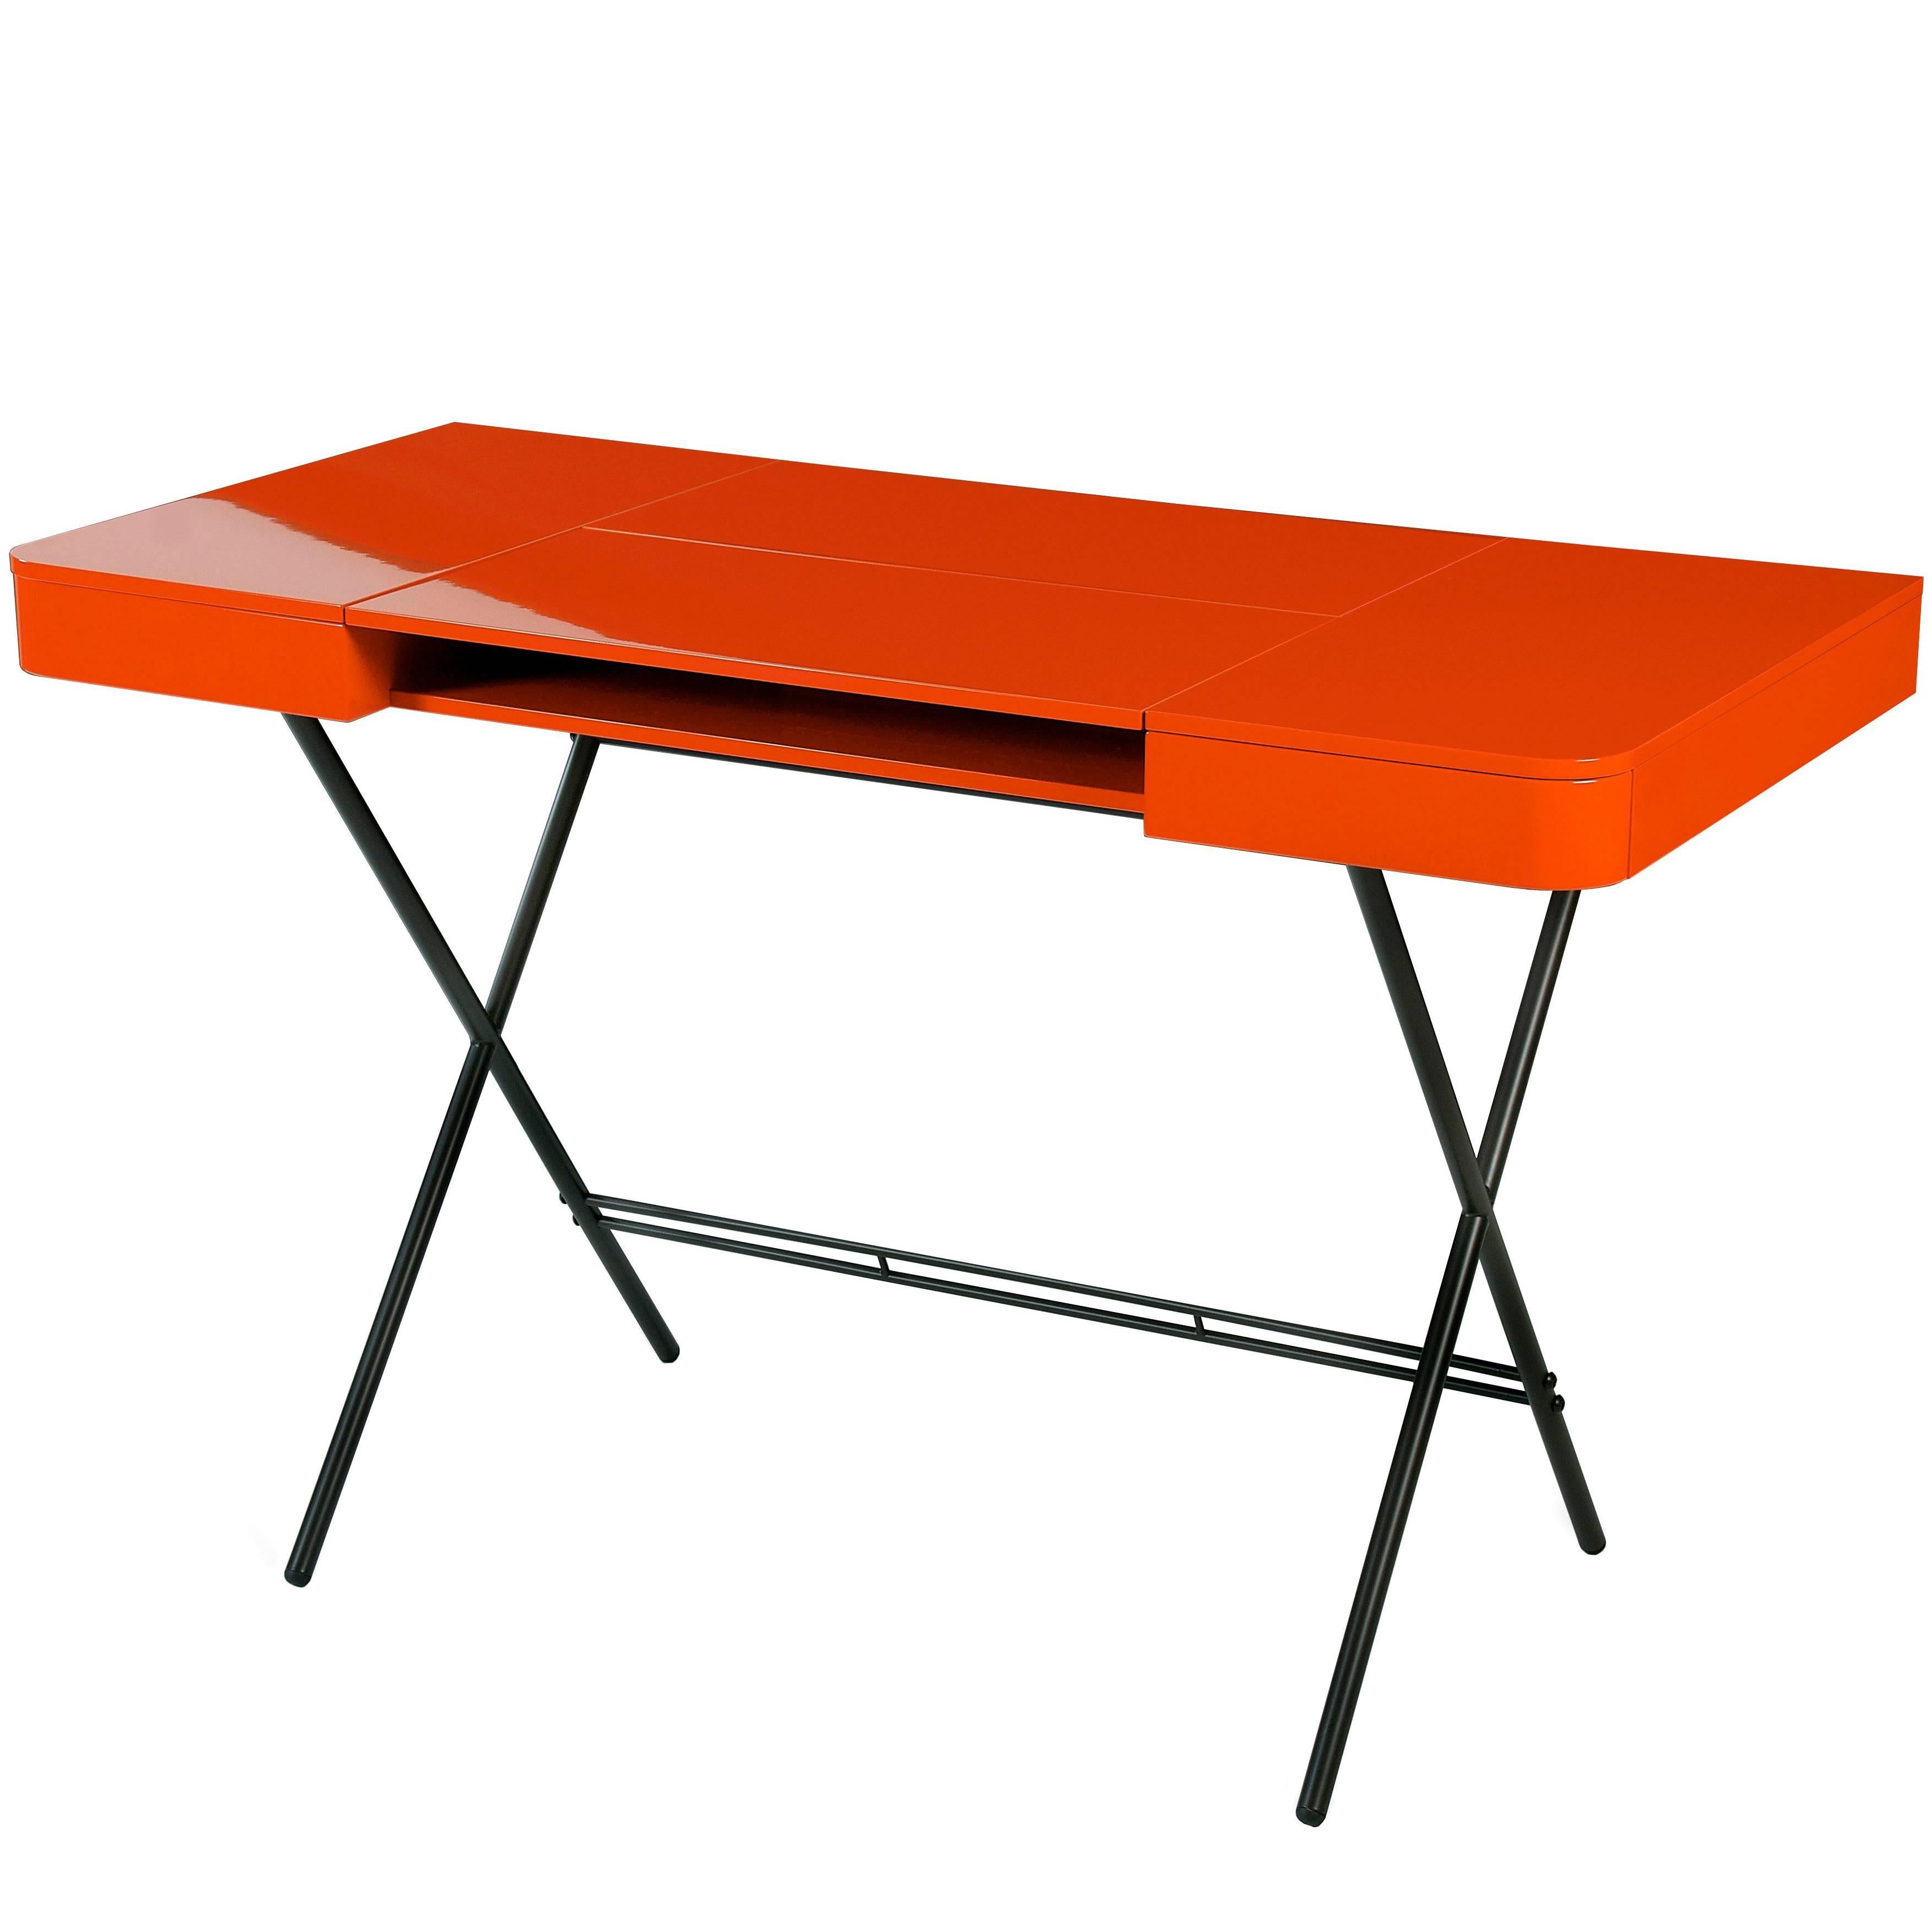 Contemporary Cosimo Desk by Marco Zanuso Jr. with Orange Glossy Lacquered Top im Angebot